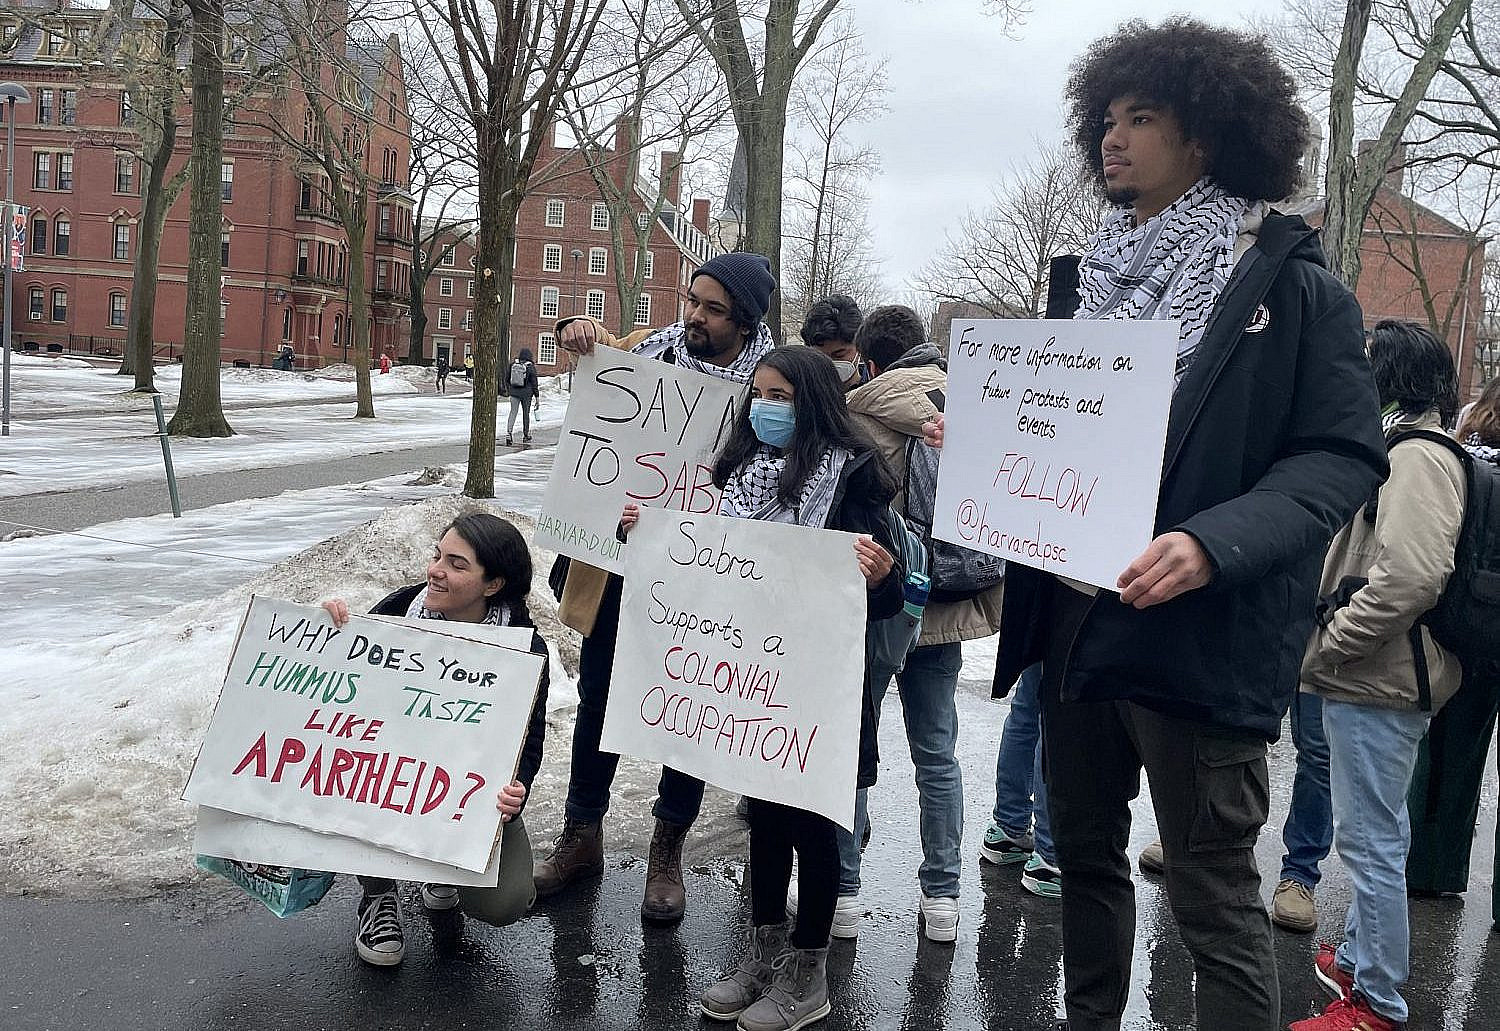 Harvard PSC members take part in a pro-Palestine protest on campus.  (Courtesy of Harvard PSC)